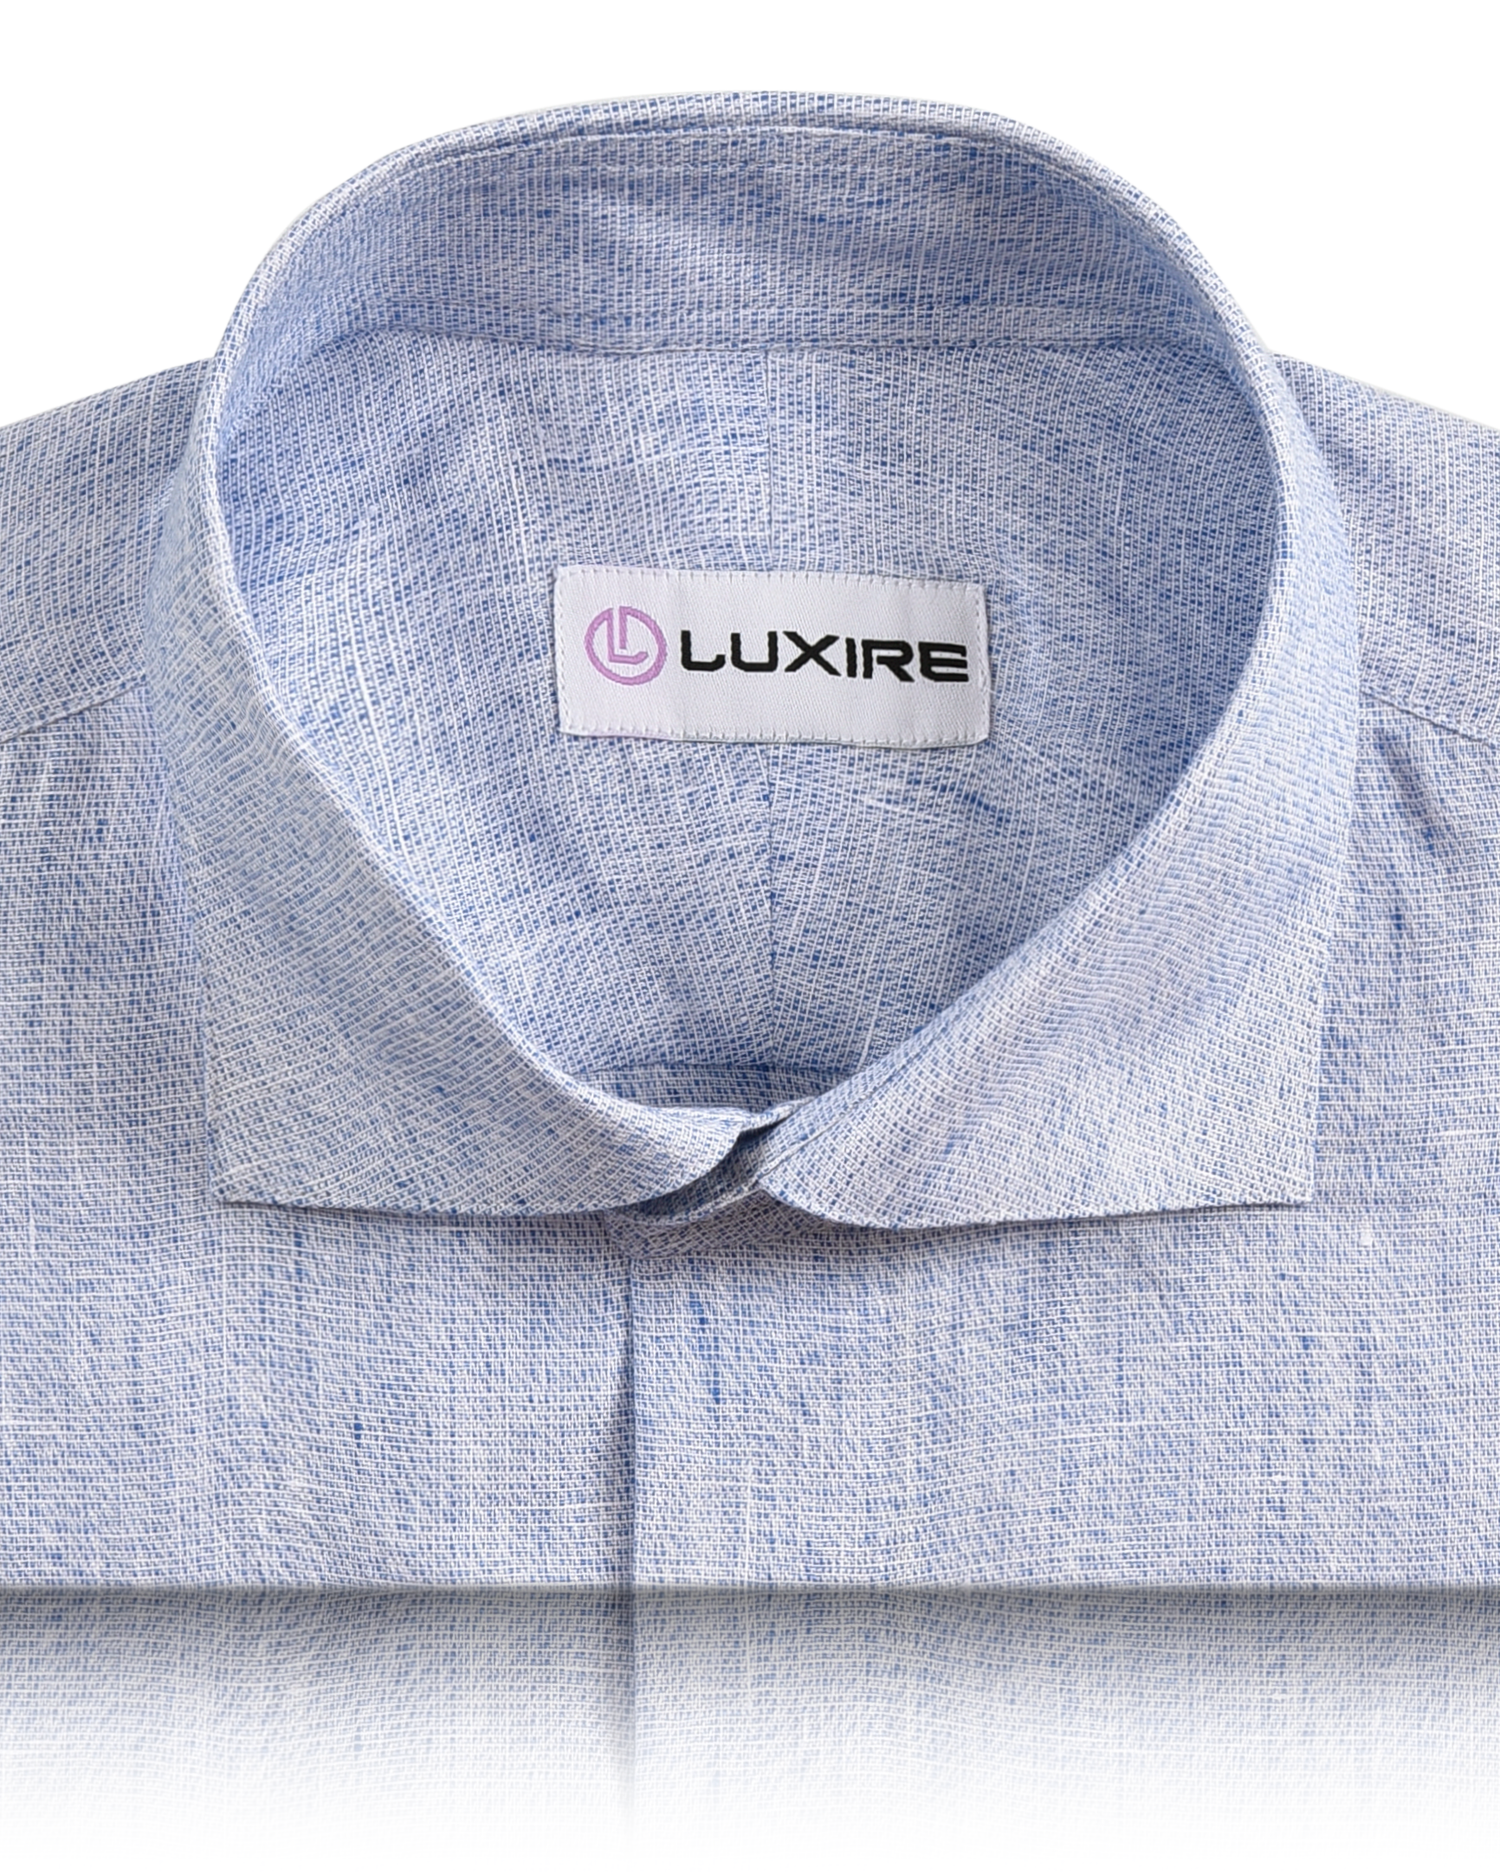 Collar of the custom linen shirt for men in lustrous blue by Luxire Clothing